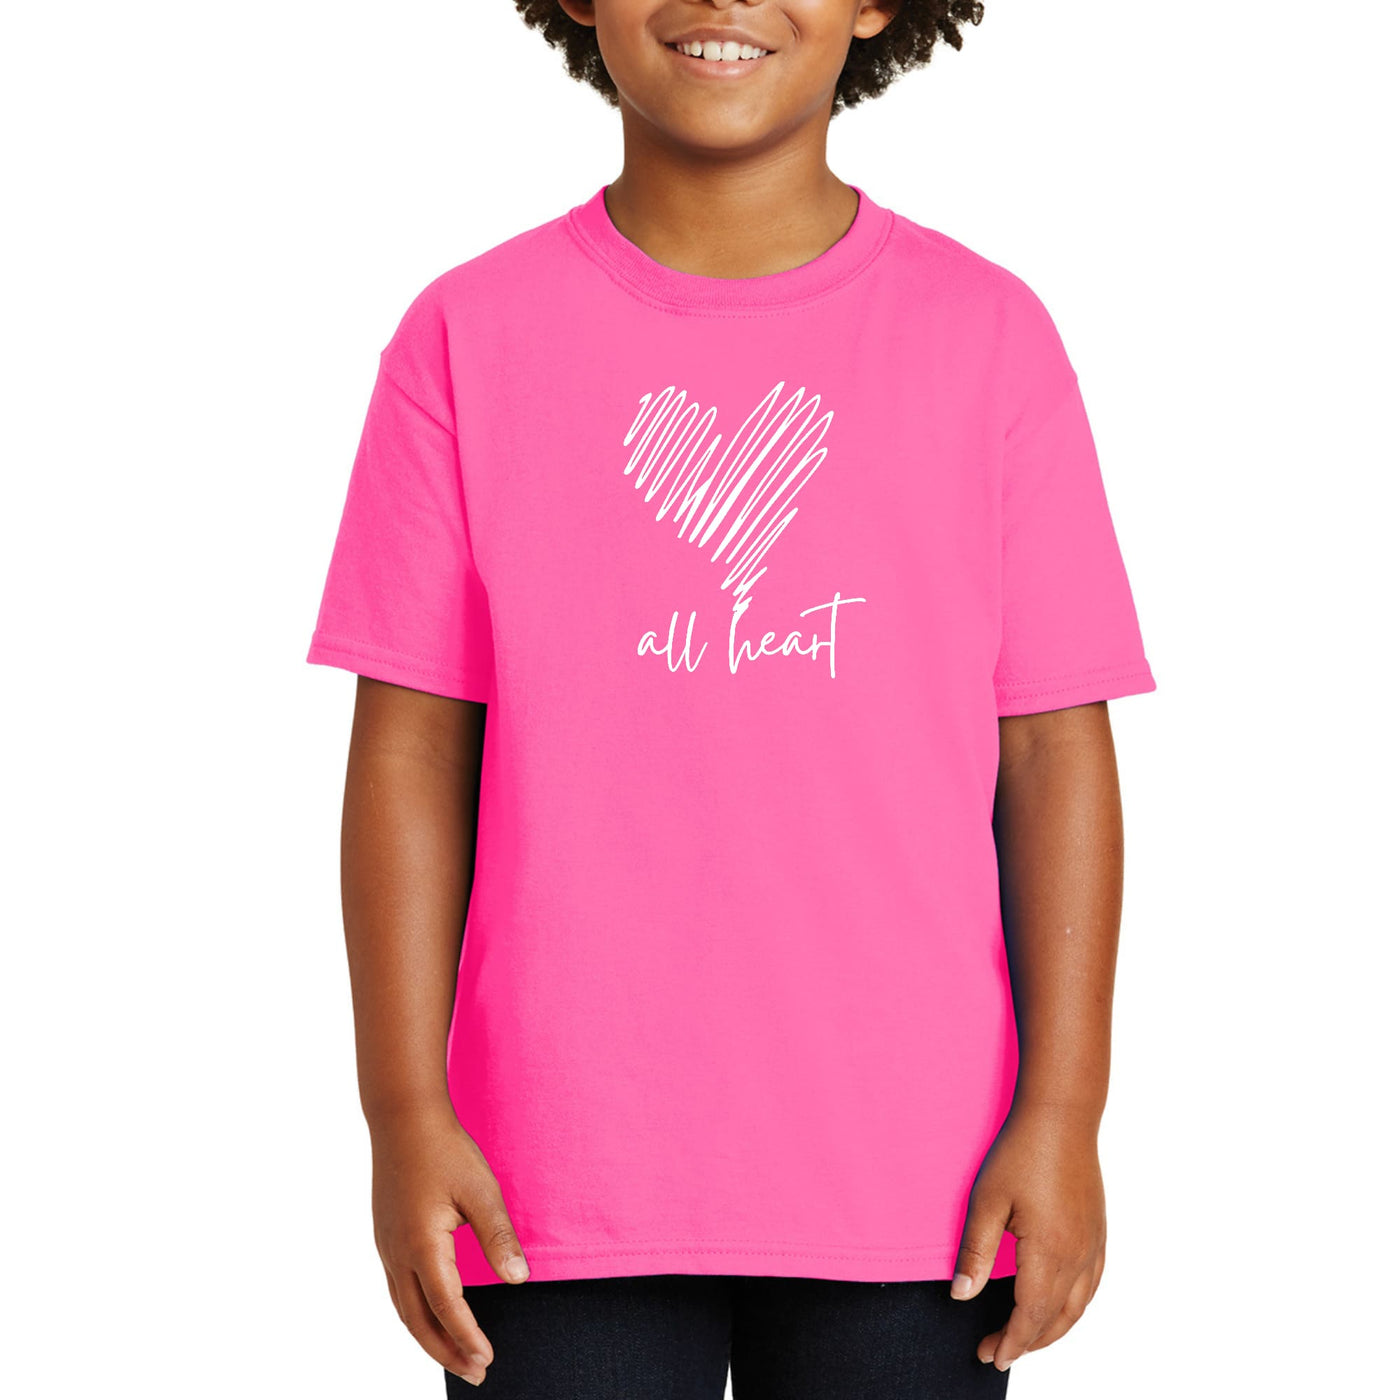 Youth Short Sleeve T-shirt Say It Soul - All Heart Line Art Print - Youth